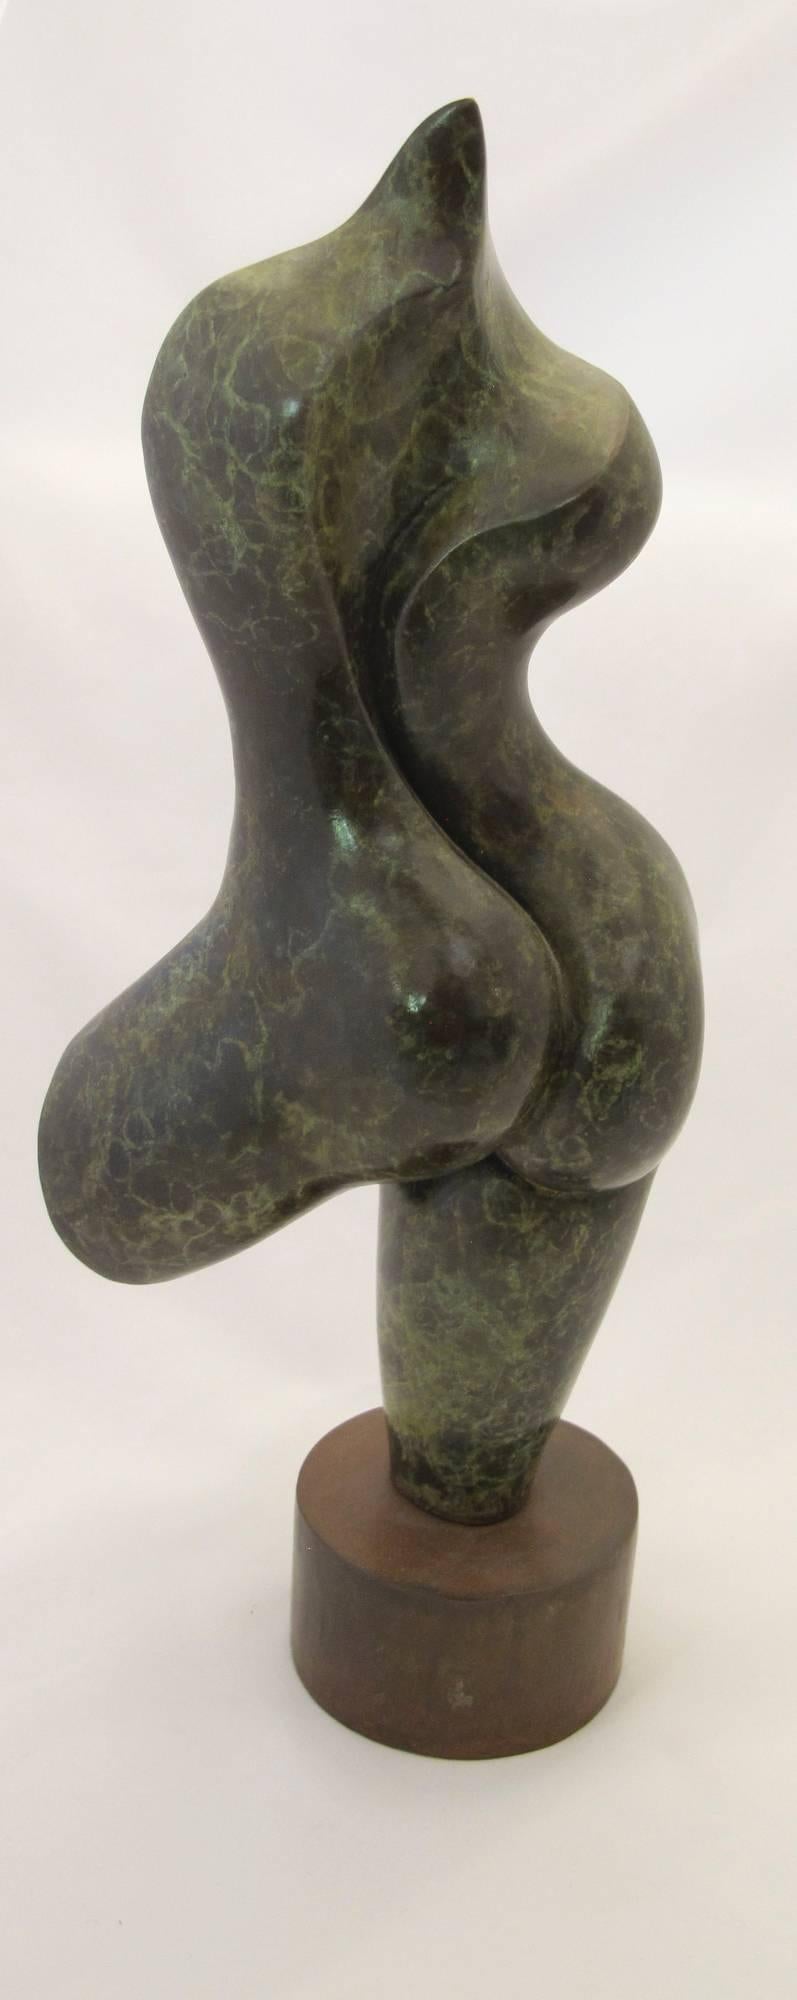 Sunrise, female nude, green patina bronze - Sculpture by Troy Williams